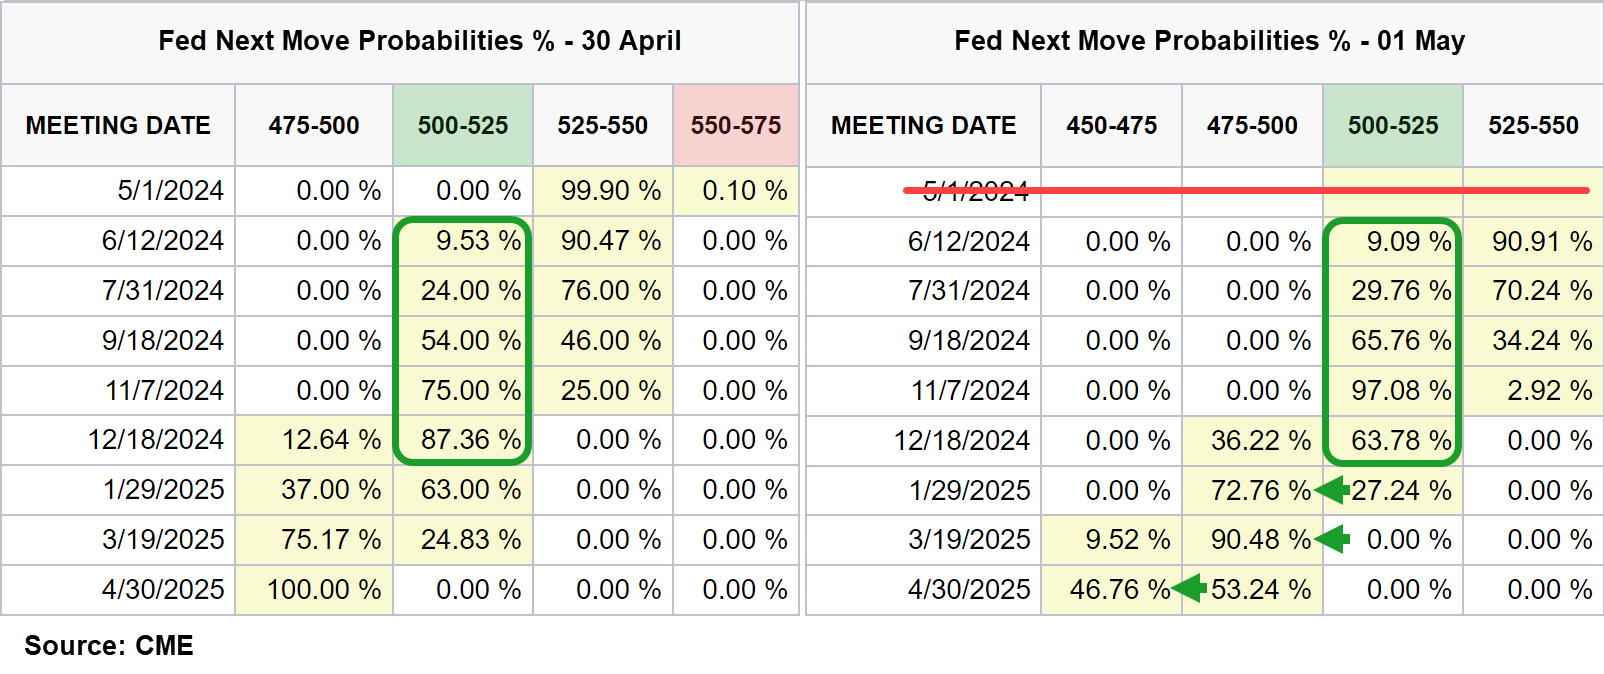 Fed Next Move Probabilities 1 May vs 30 April, Chairman Powell's comments impact. Source: CME